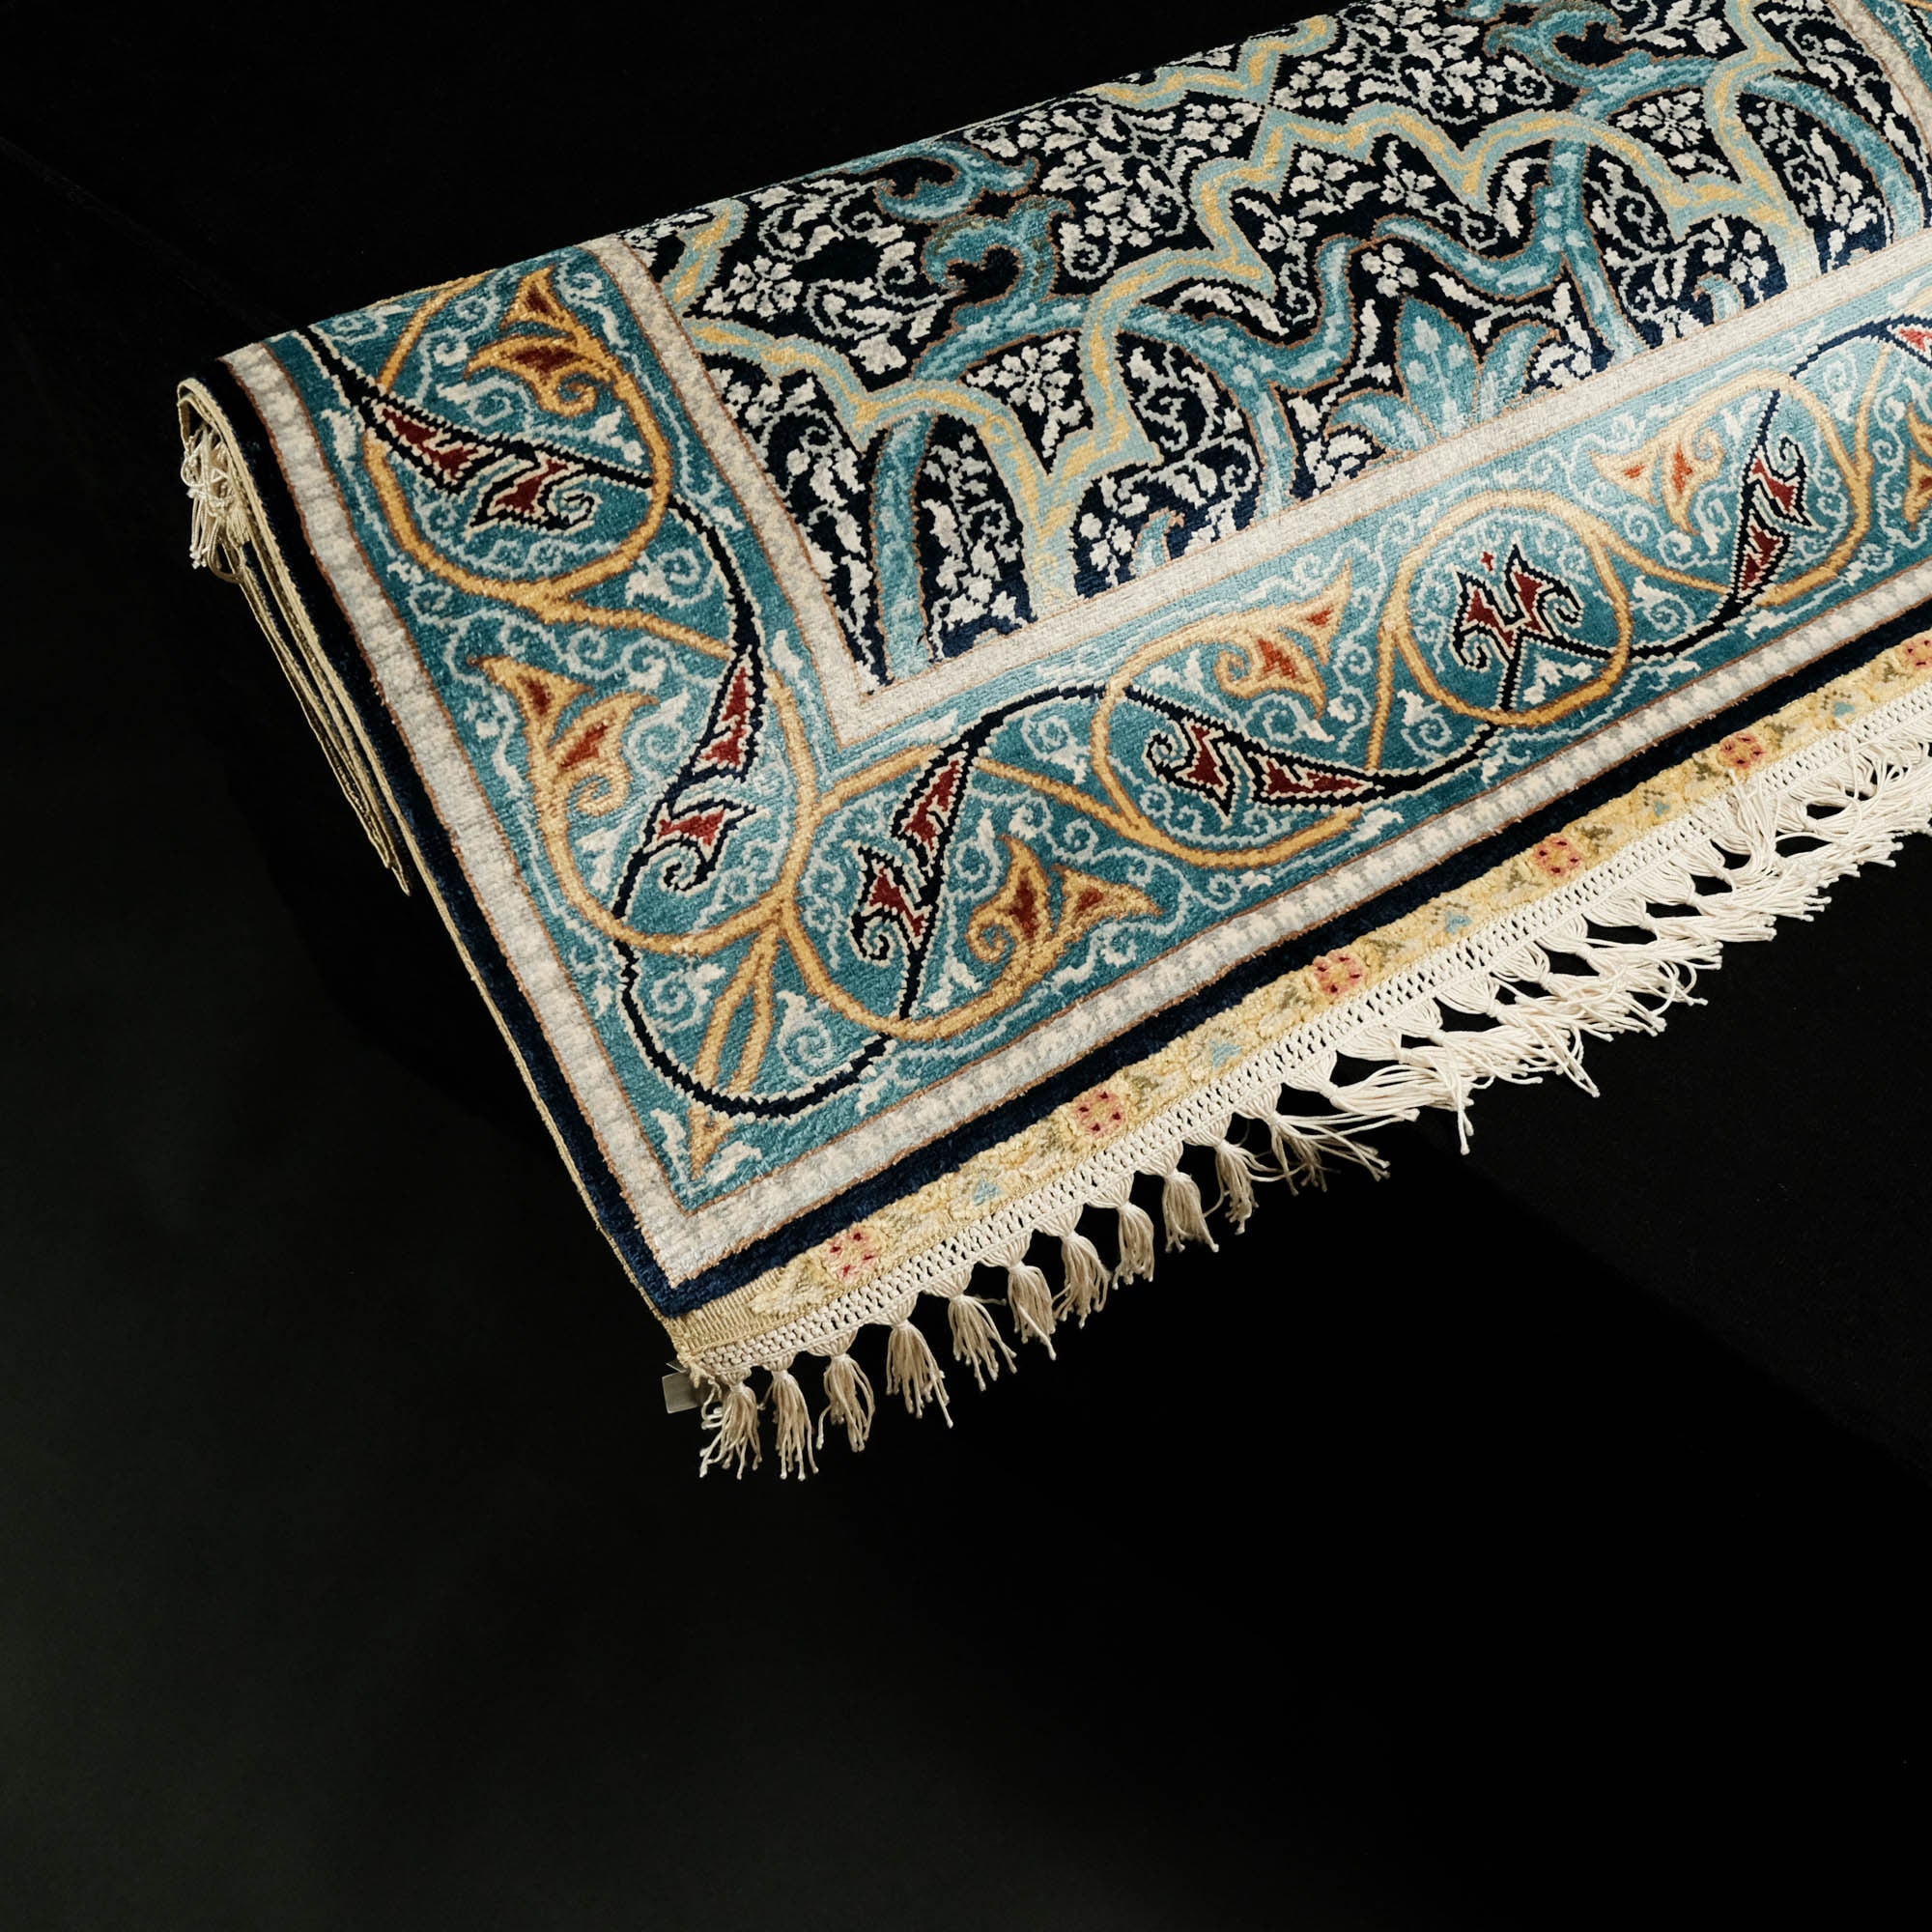 Hand-Woven Turquoise Silk Carpet with Frame Pattern